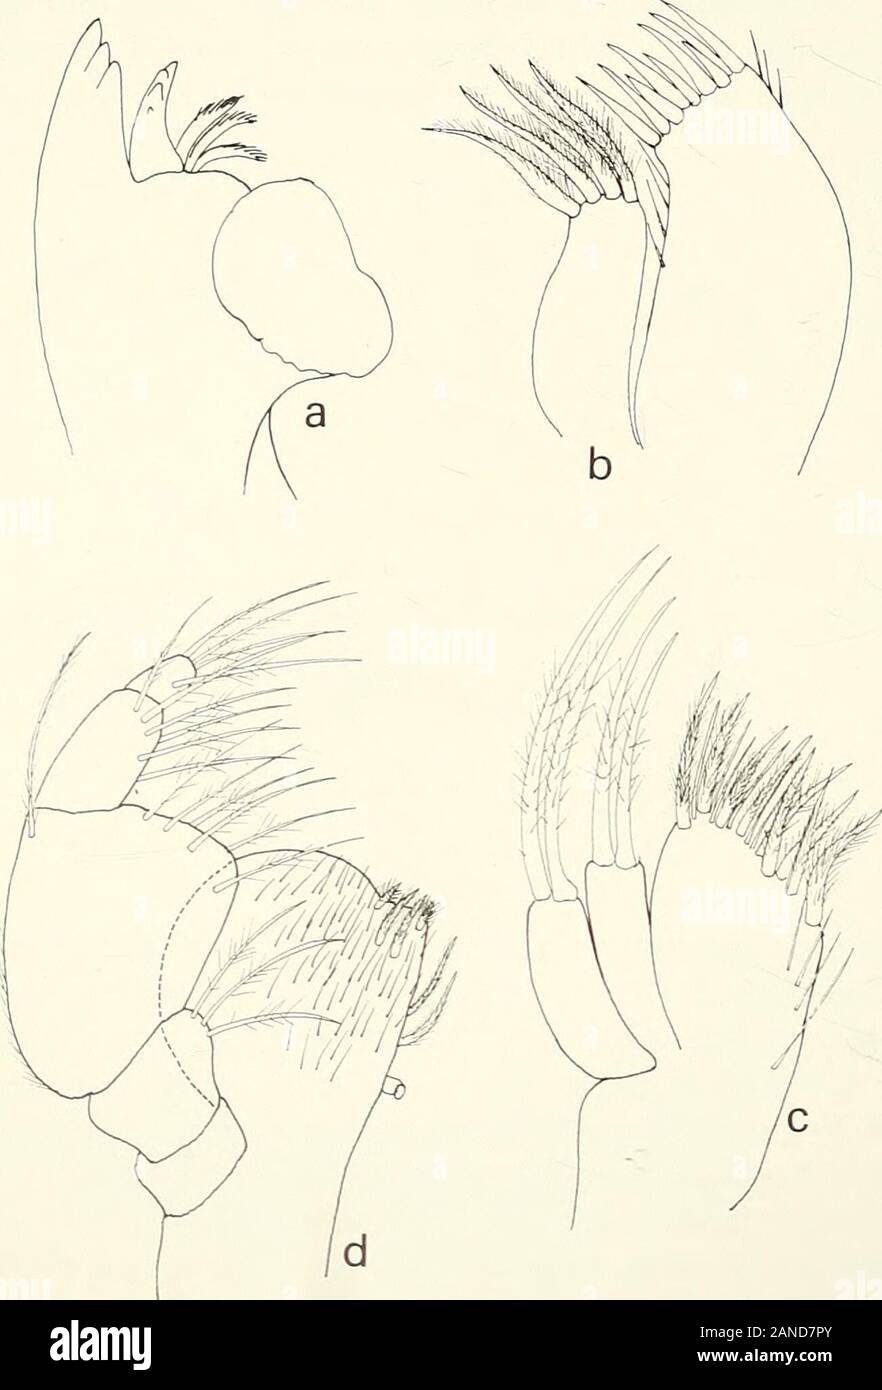 Annals of the South African Museum = Annale van die Suid-Afrikaanse Museum . Fig. 3. Arcturinoides sexpes. a. ? dorsal view. b. brood pouch in ventral view. view. d. cj lateral view. c. c? dorsal 244 ANNALS OF THE SOUTH AFRICAN MUSEUM Maxillipedal endite bearing six plumose setae near inner distal angle, singlecoupling hook on inner margin, palp 5-segmented, 3rd segment very broad,four distal segments with setae on inner margins. Pereiopod I folded against mouthparts within rim of head and firstpereionite; dactylus with strong claw; propodus bearing numerous fringedsetae; carpus with fringed s Stock Photo